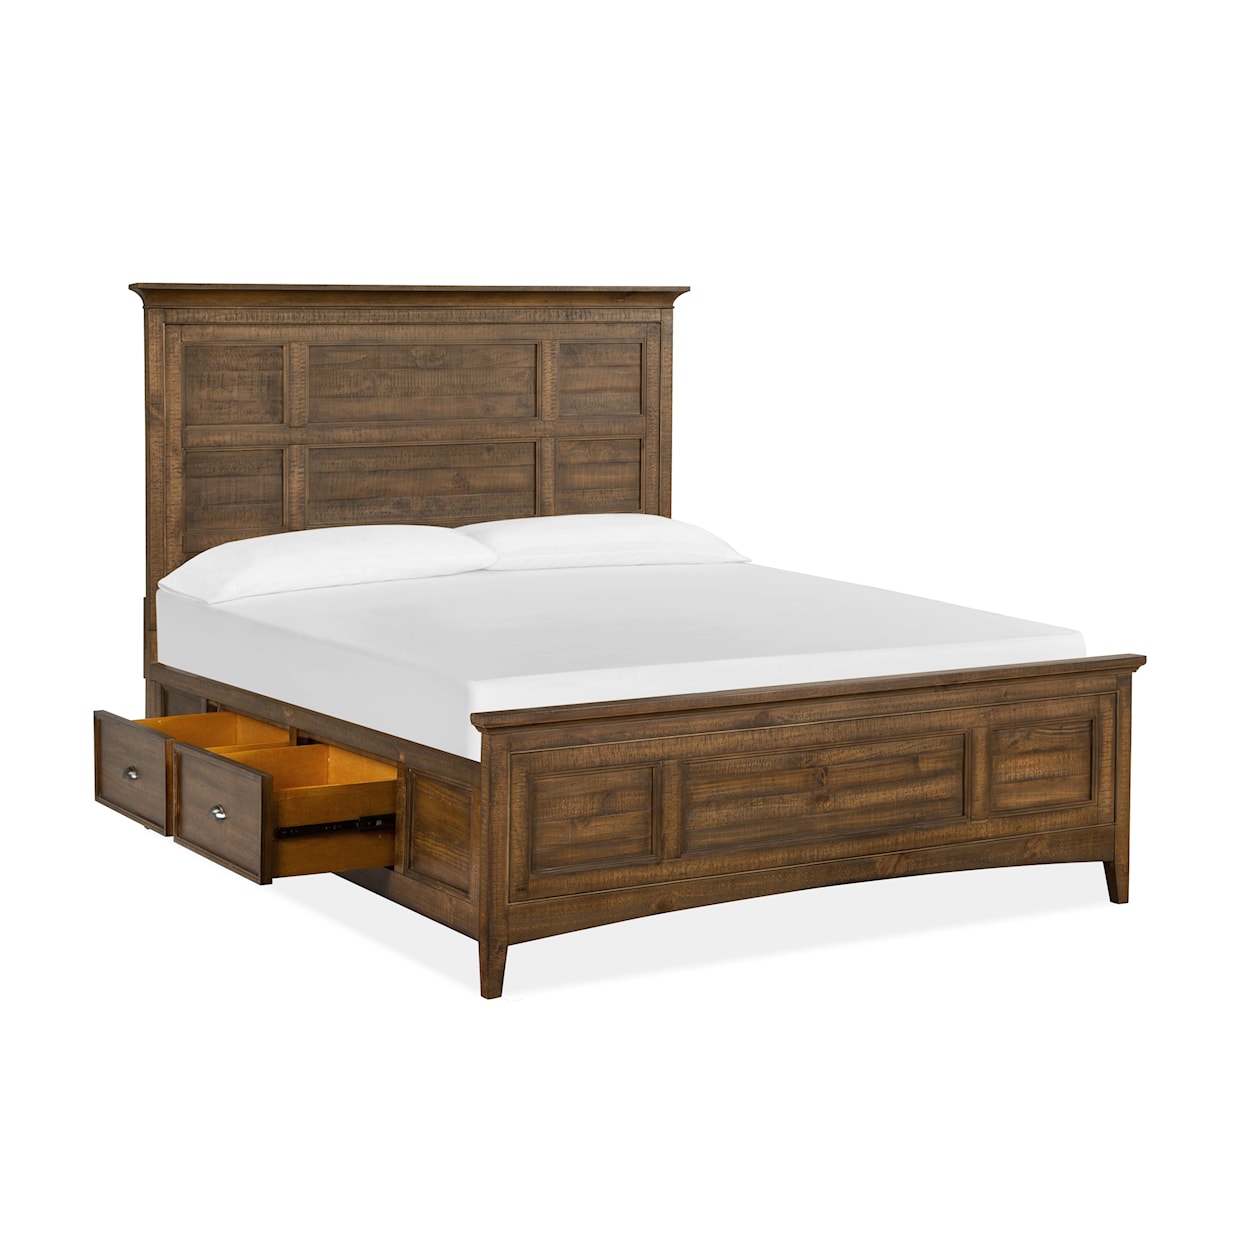 Magnussen Home Bay Creek Bedroom California King Bed with Storage Rails